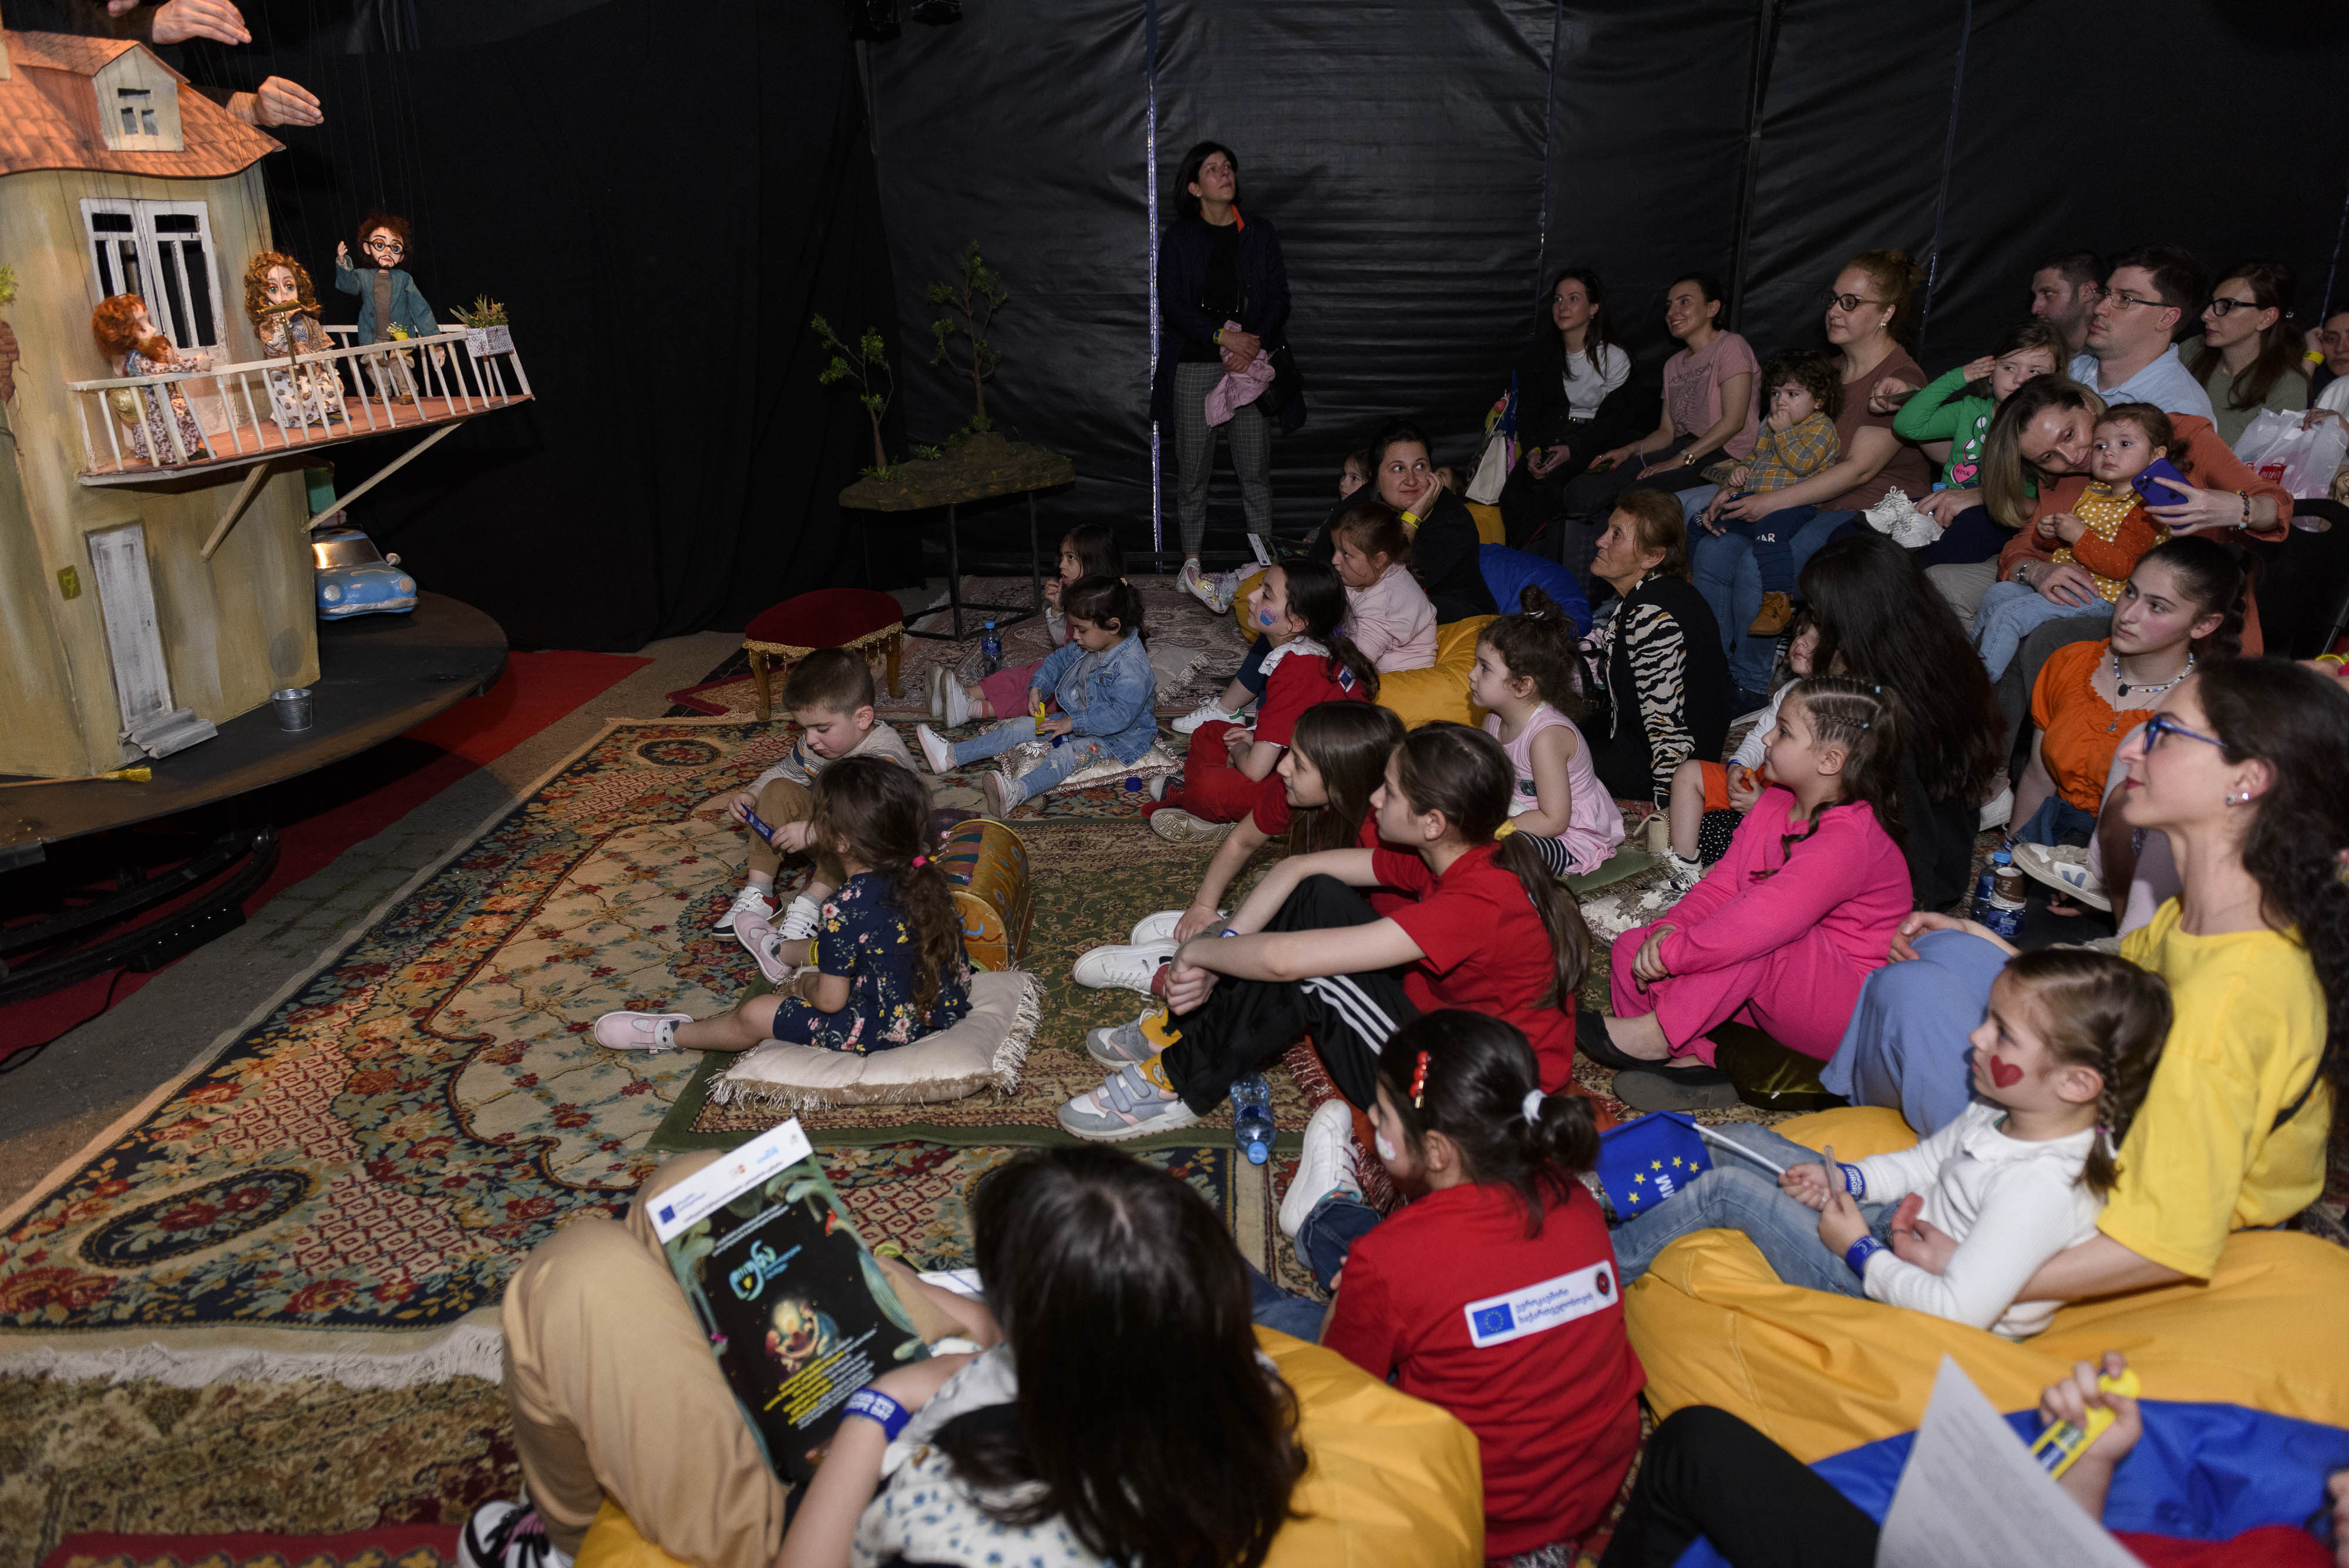 A bunch of children and adults sitting on the carpet watching a puppet show